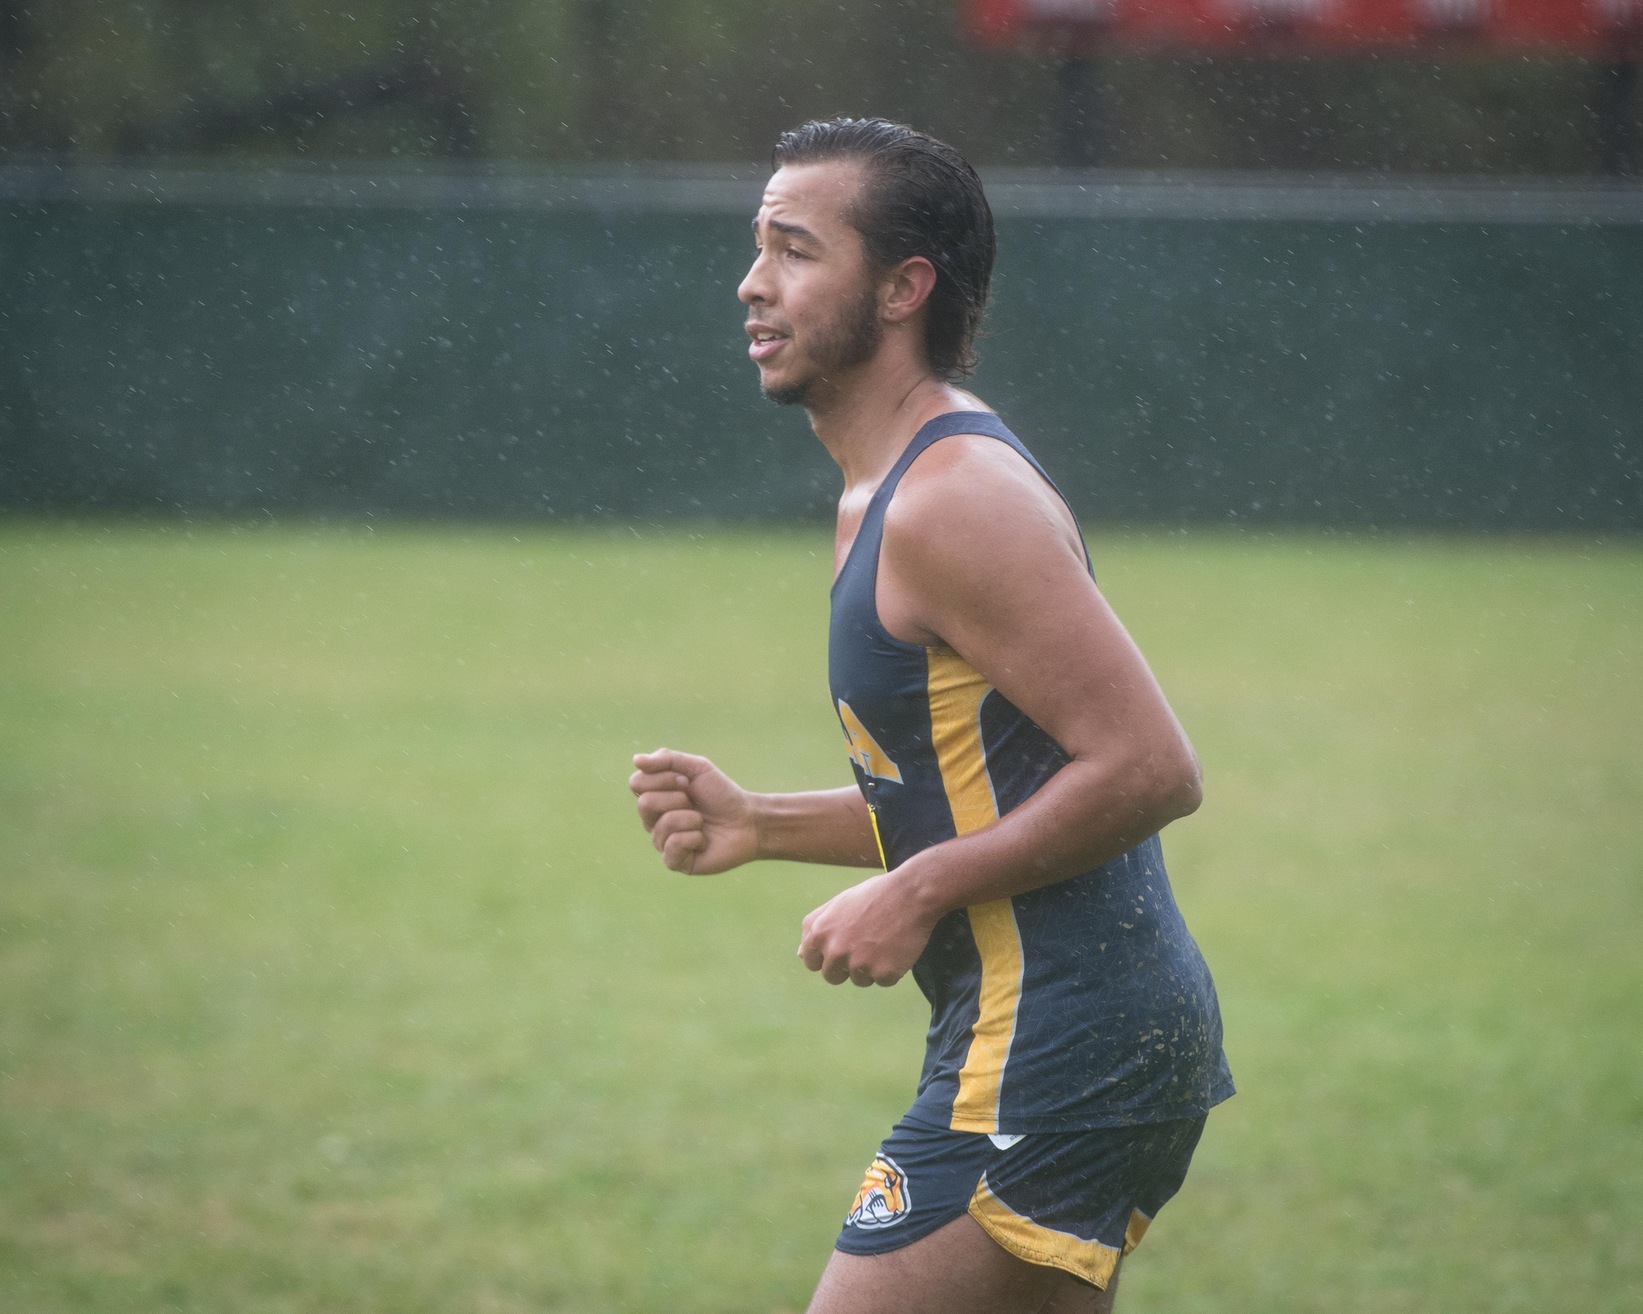 Men's Cross Country competes at UMass Dartmouth